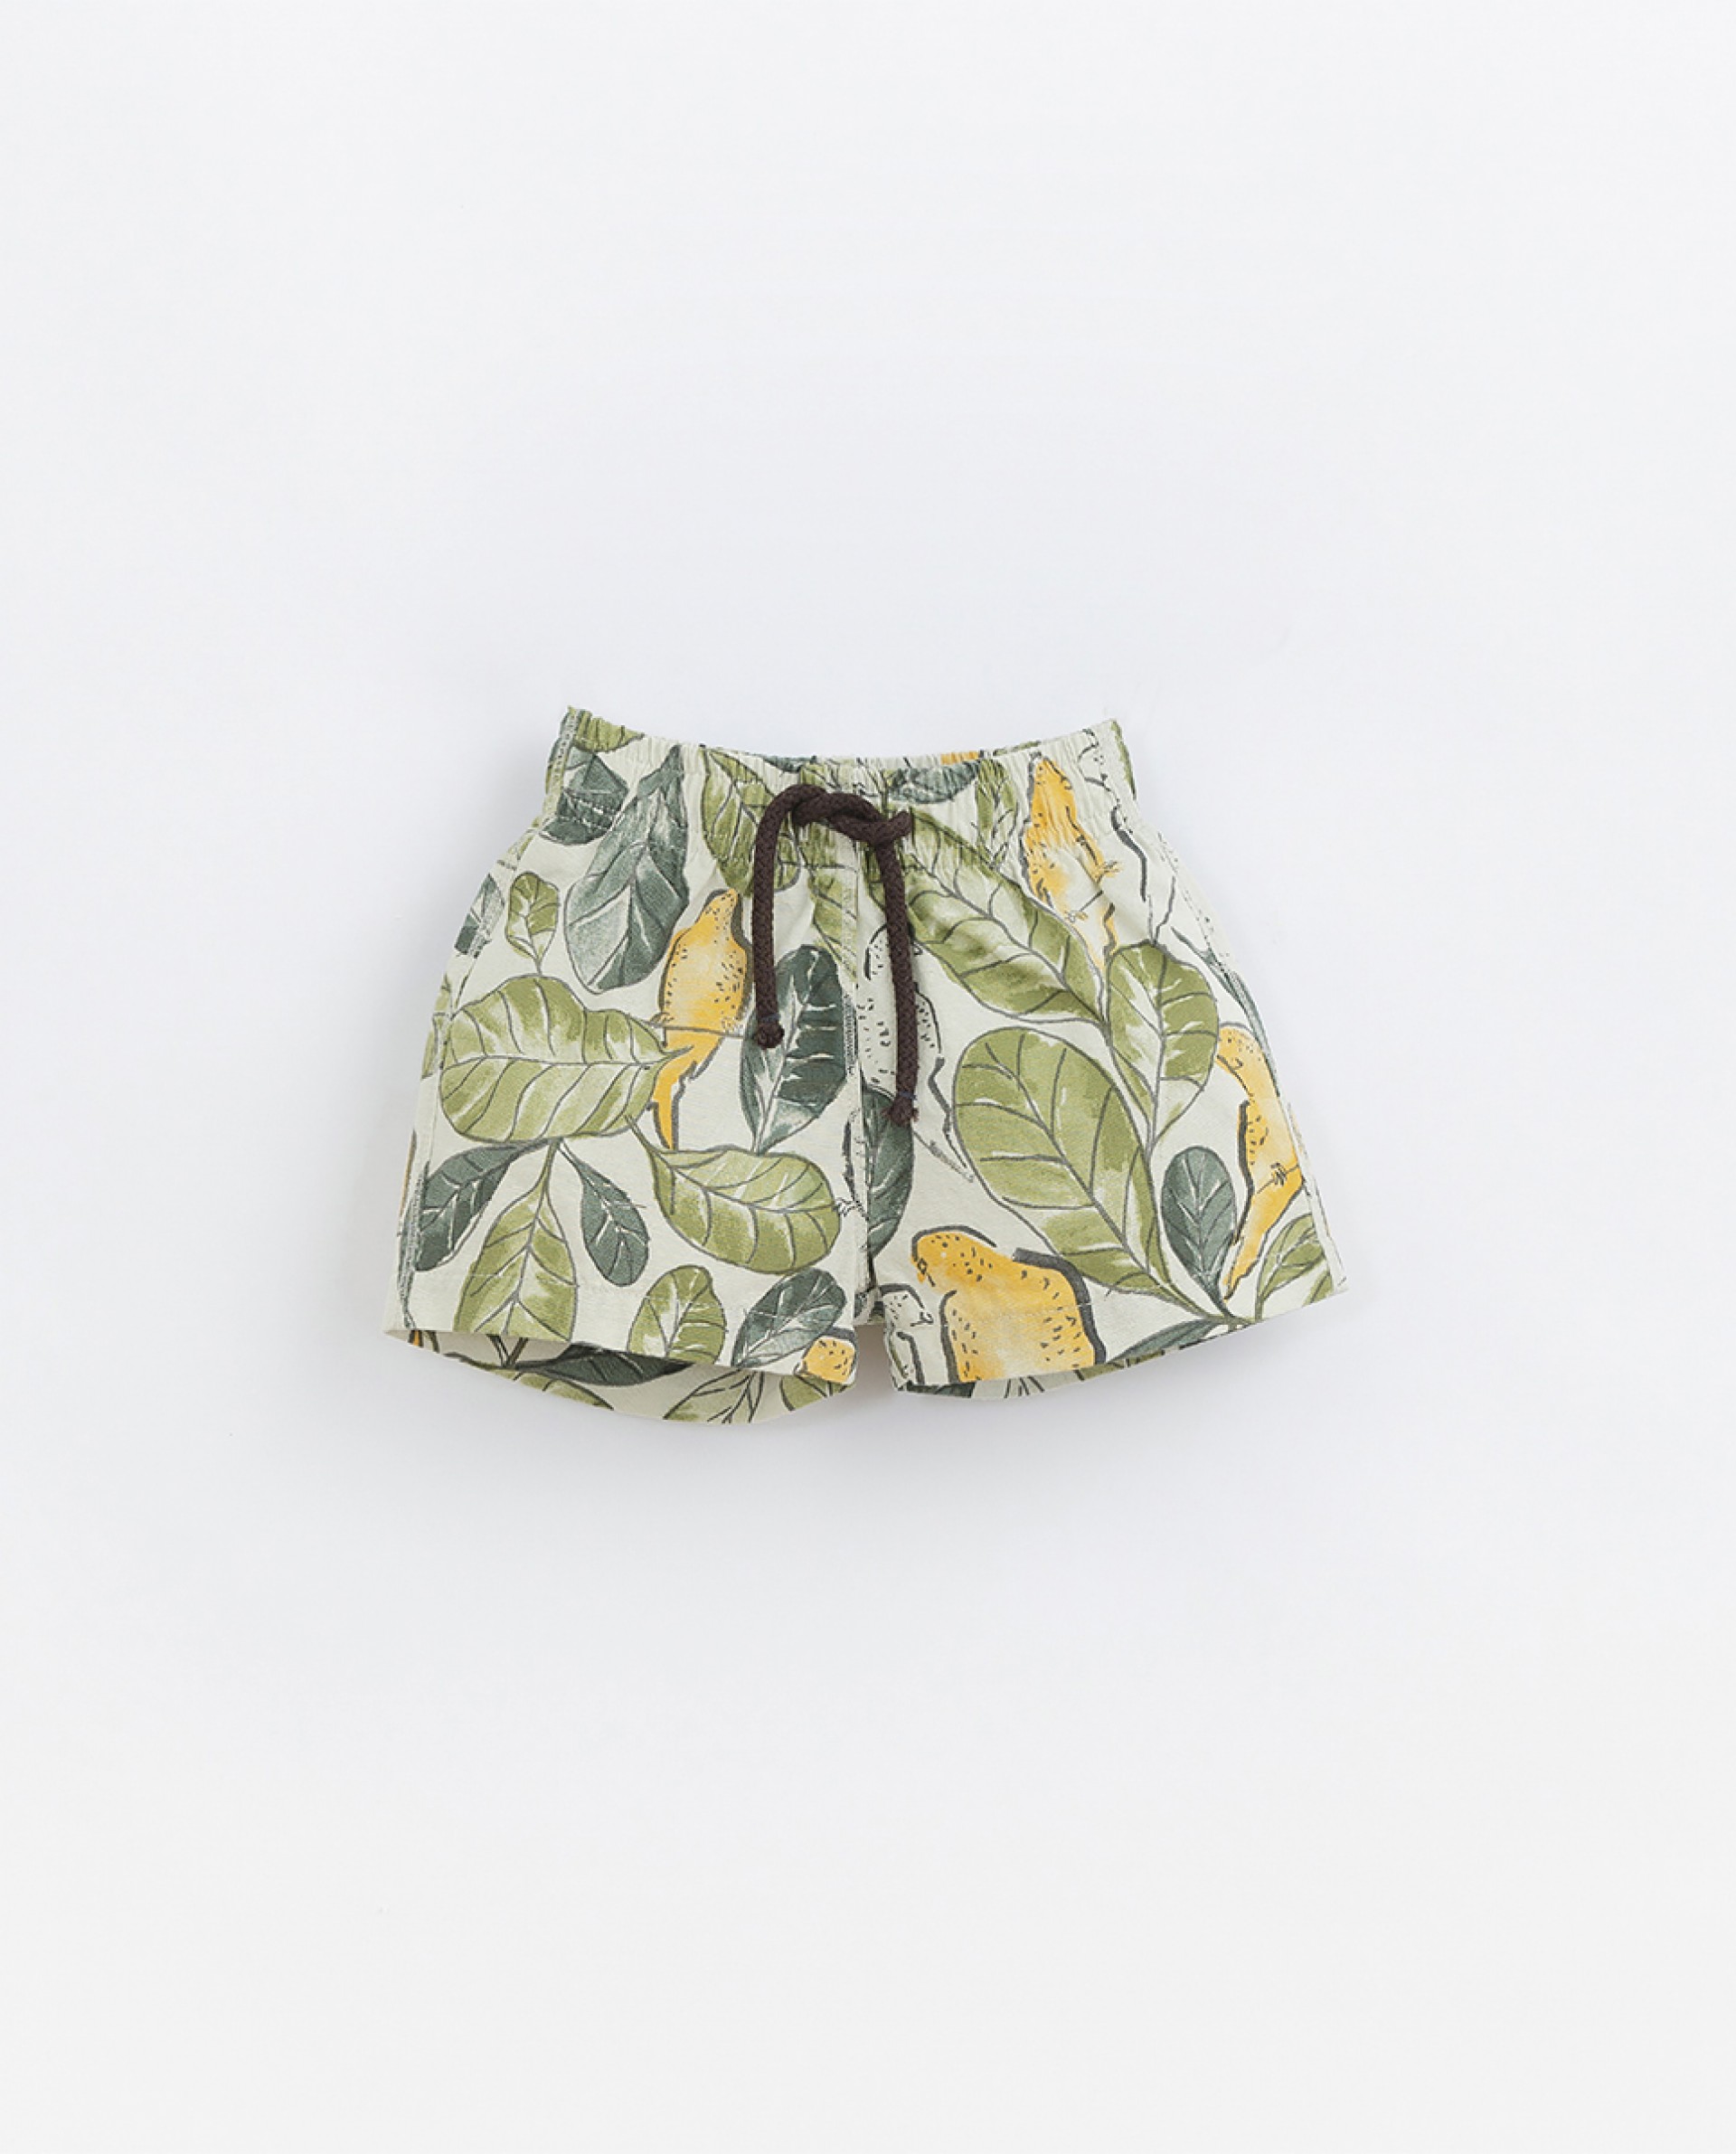 Swimming trunks with interior underpants | Basketry